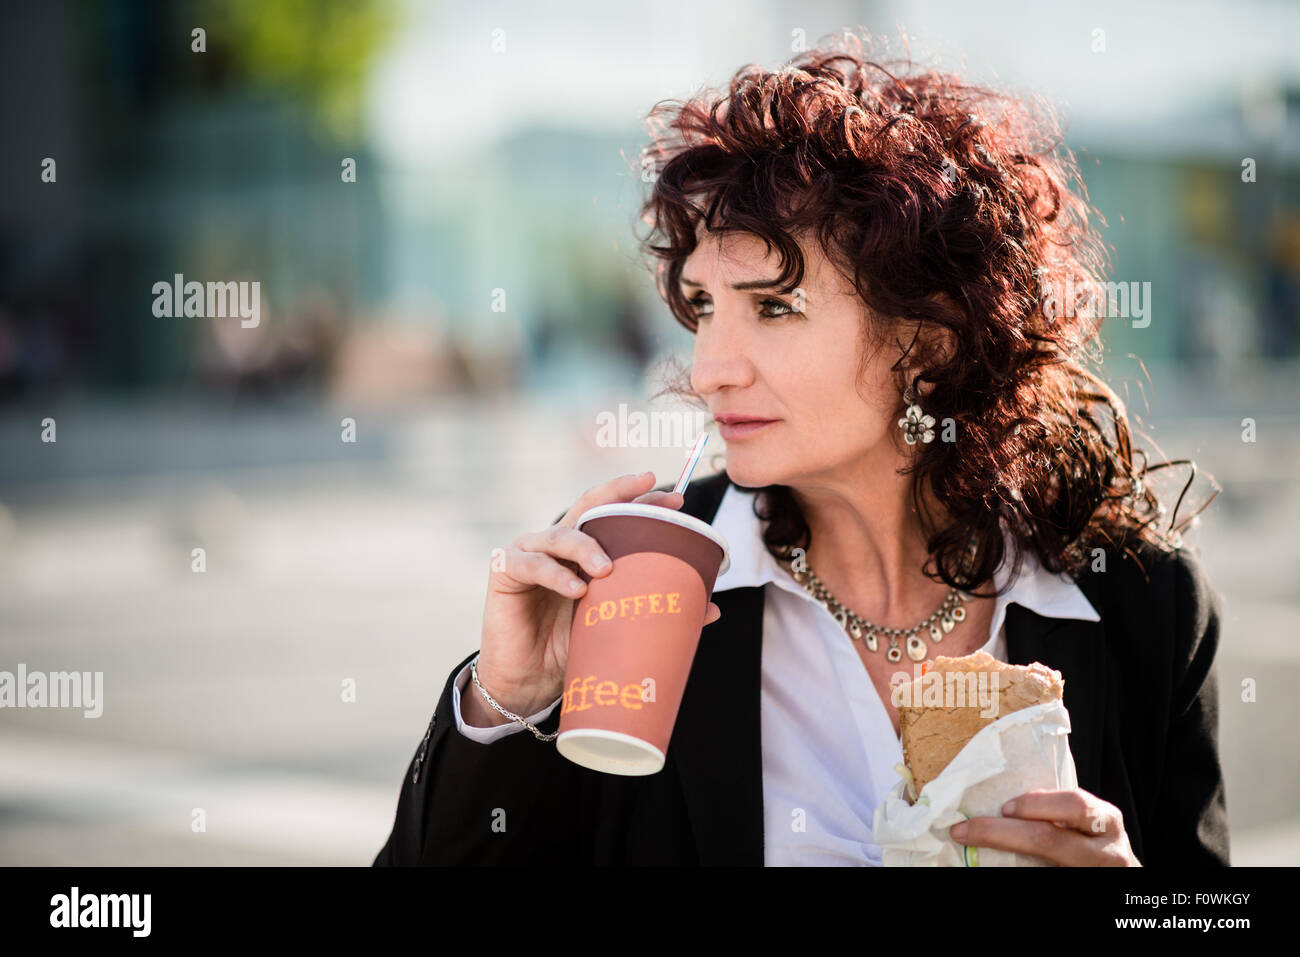 Senior business woman on fast food lunch - drinking take-away coffee and eating sandwich in street Stock Photo